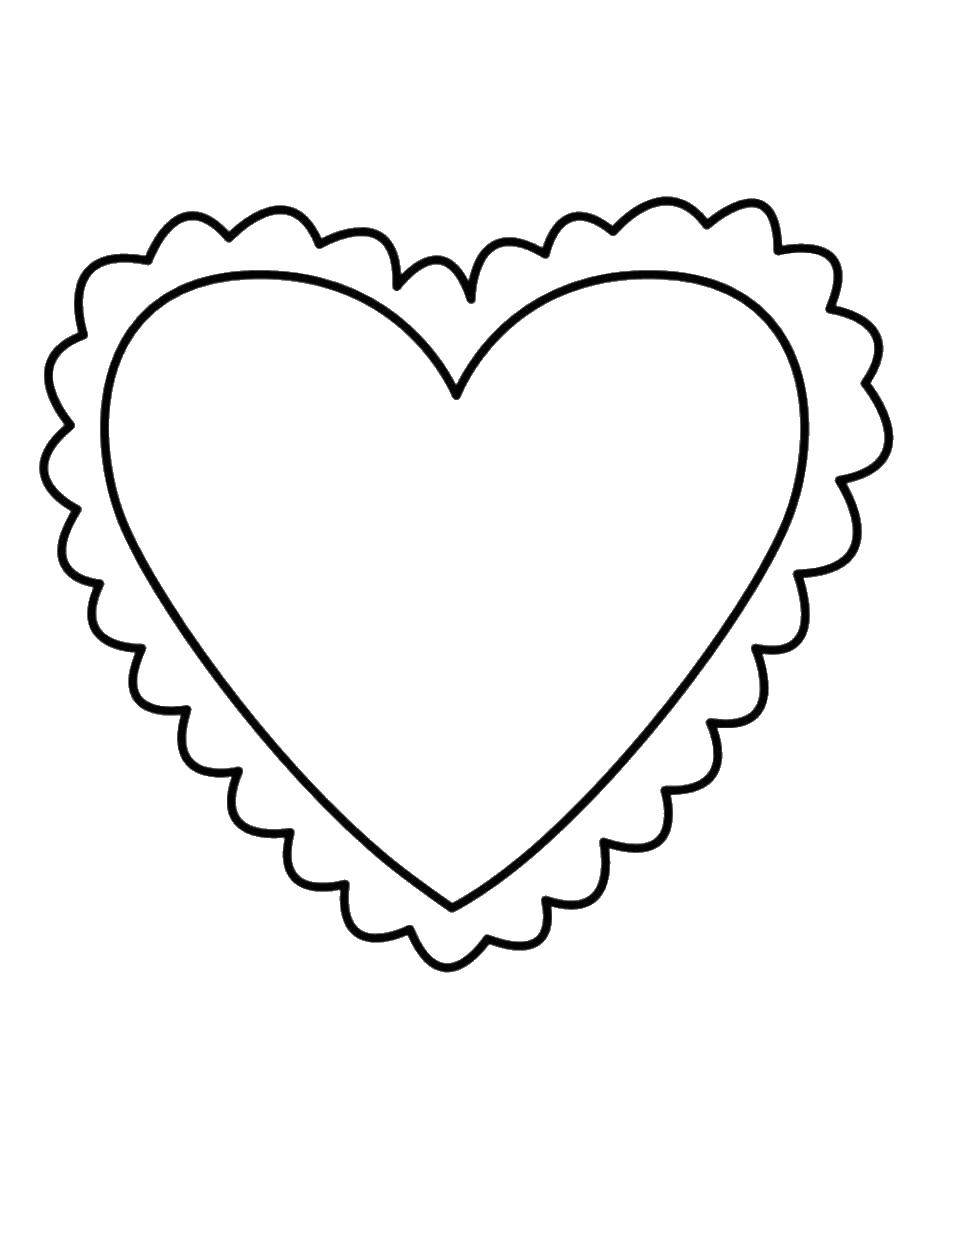 Coloring Heart in lace. Category Hearts. Tags:  Heart, love.